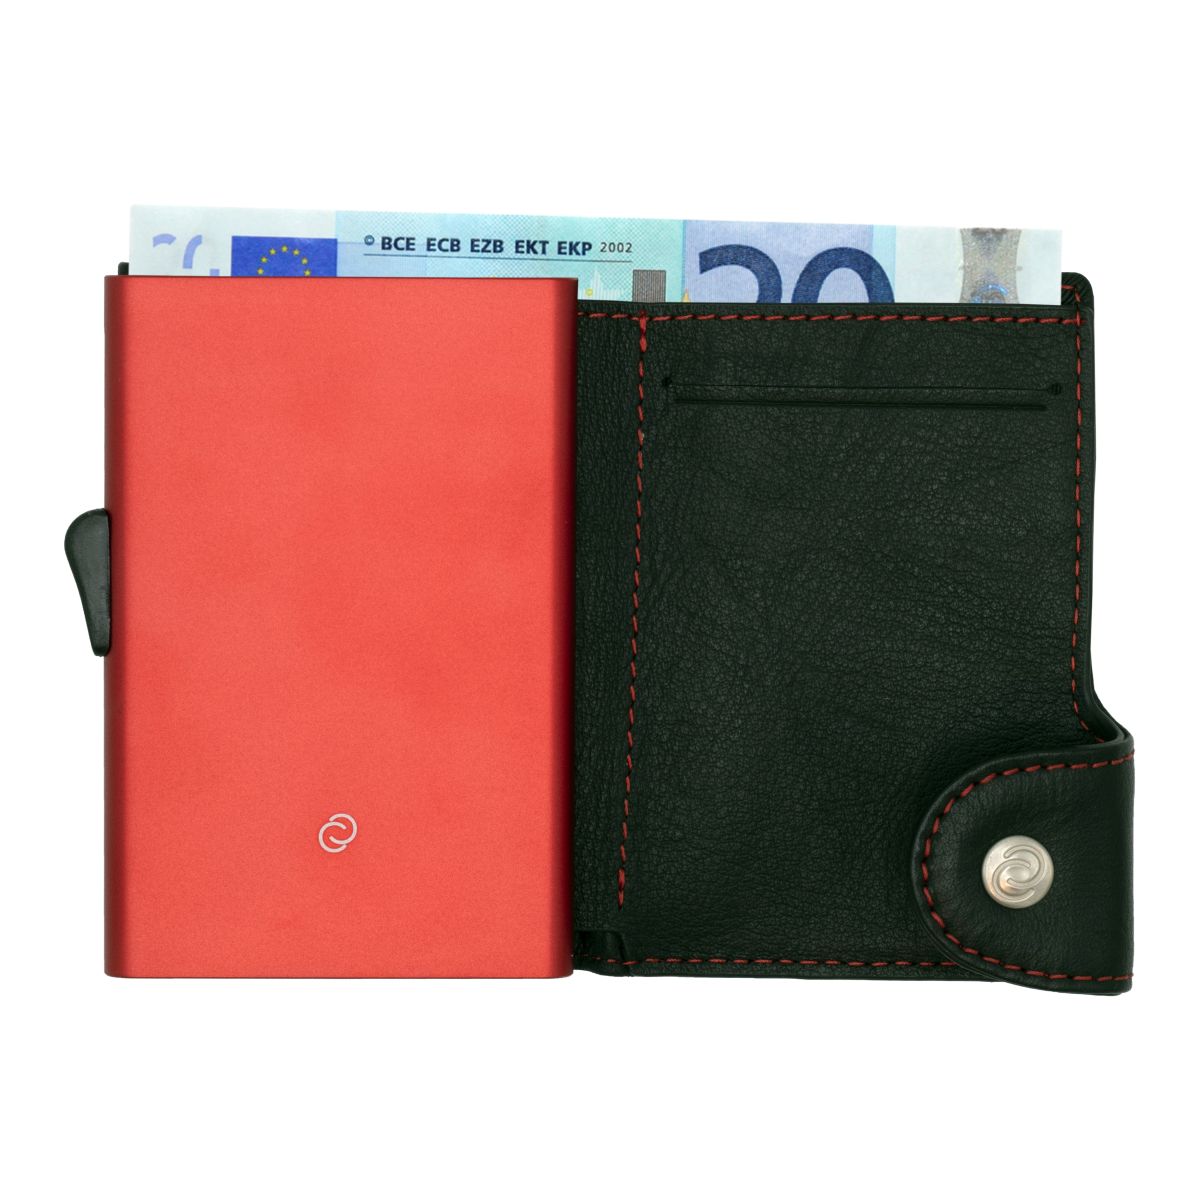 C-Secure Aluminum Card Holder with Genuine Leather - Black / Red